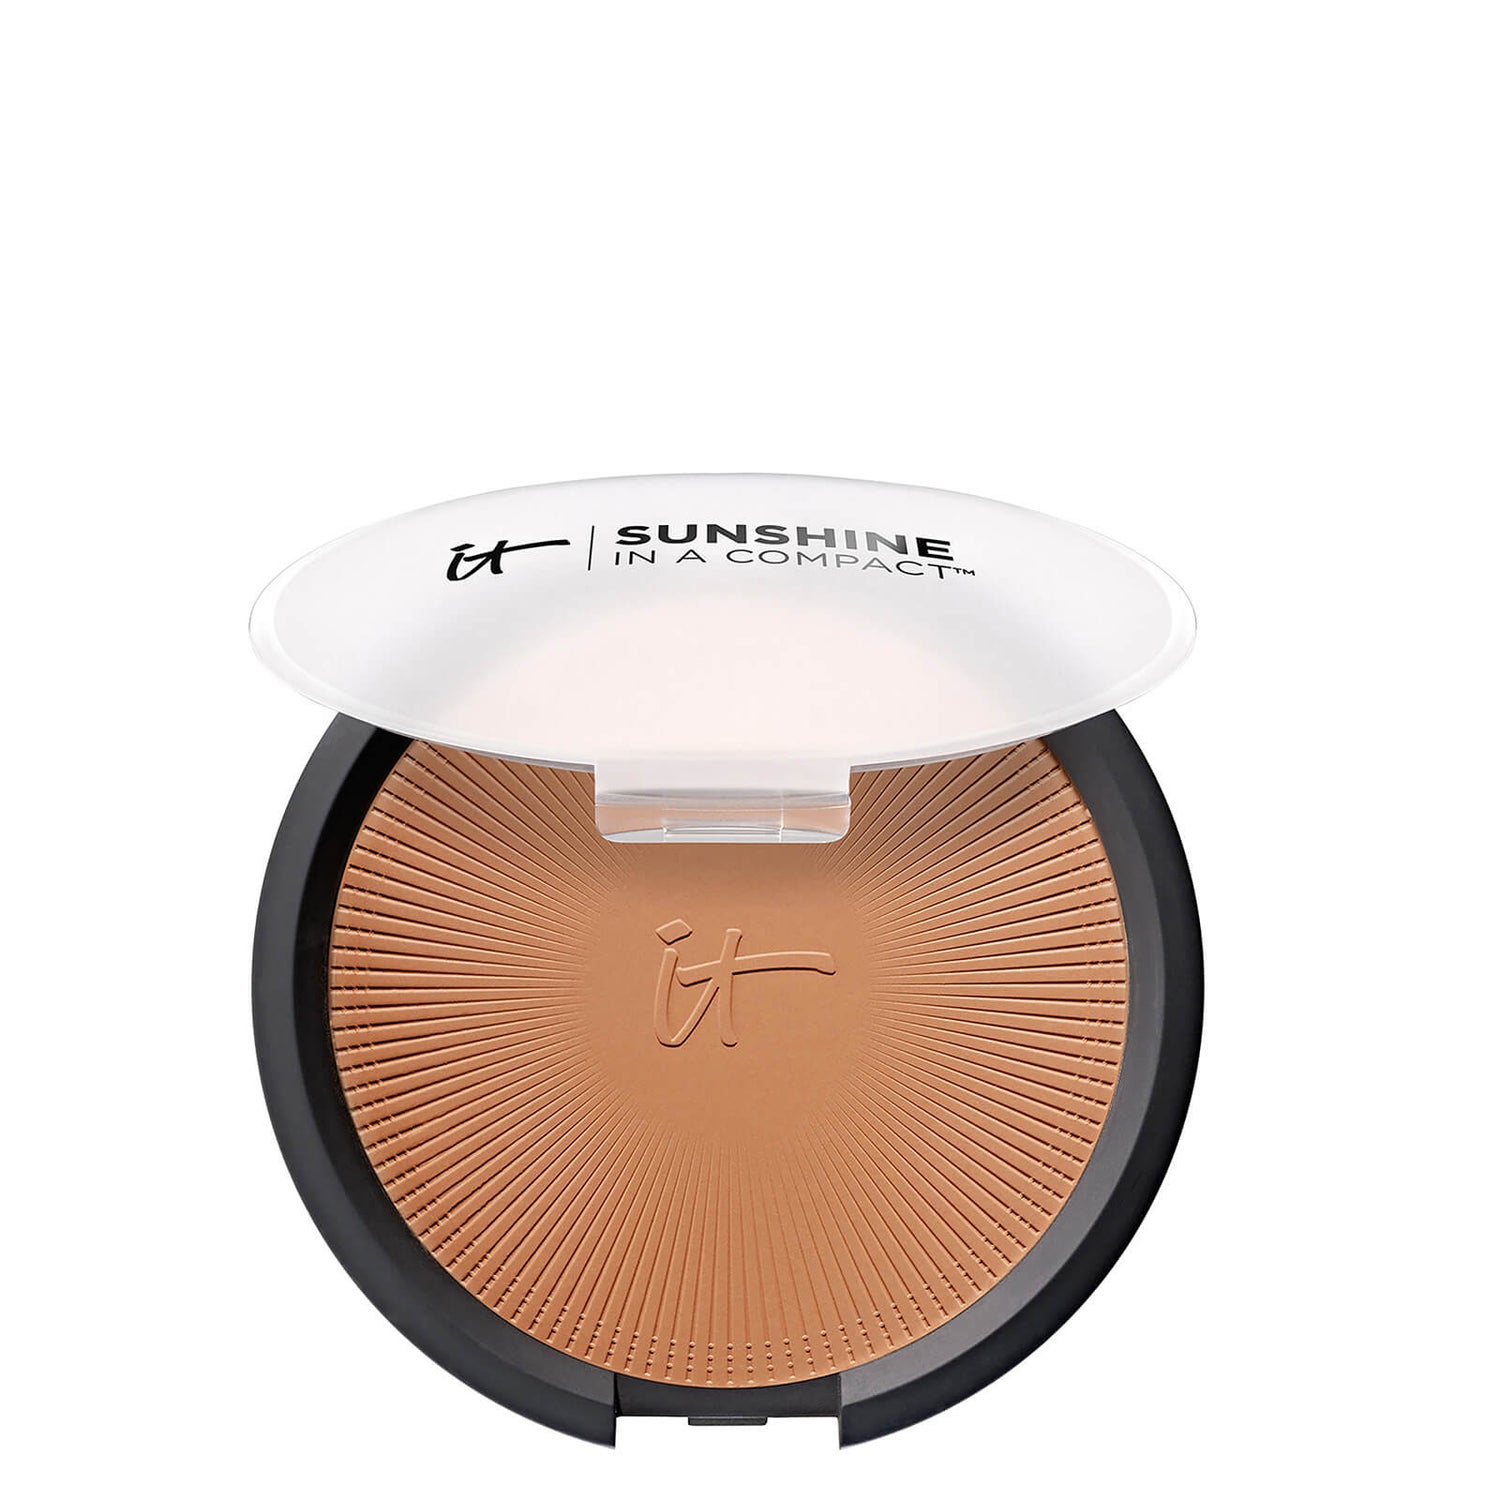 IT Cosmetics Sunshine in a Compact - Warmth 16.17g